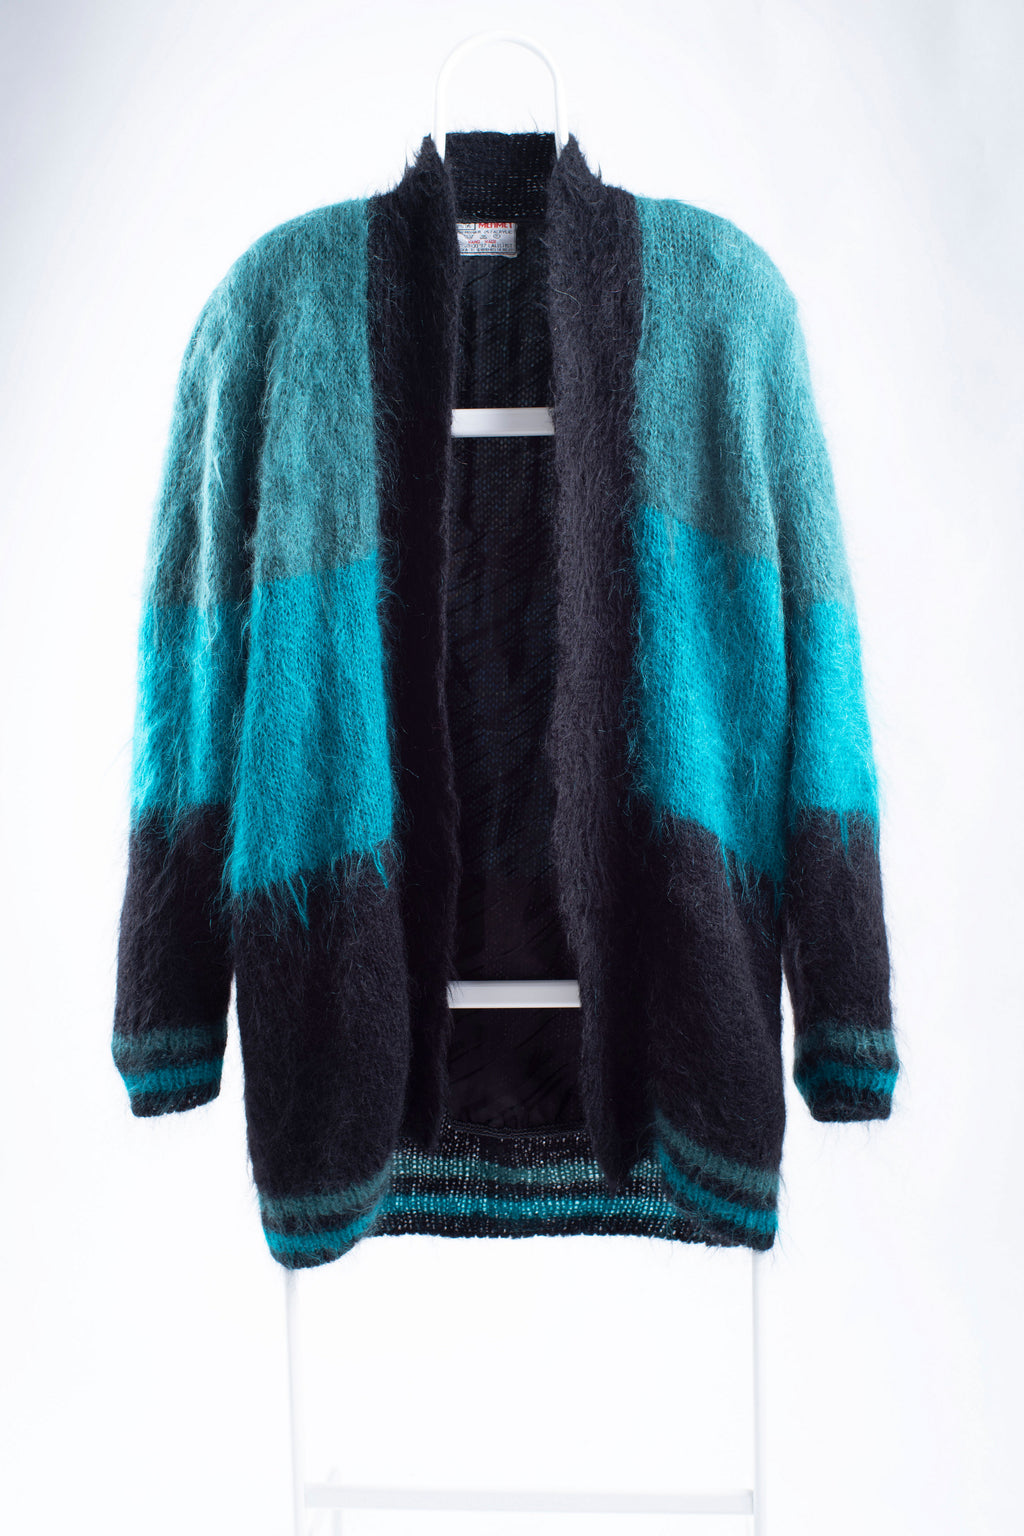 Vintage Colorblock Oversized Green Mohair Cardigan, SIZE L